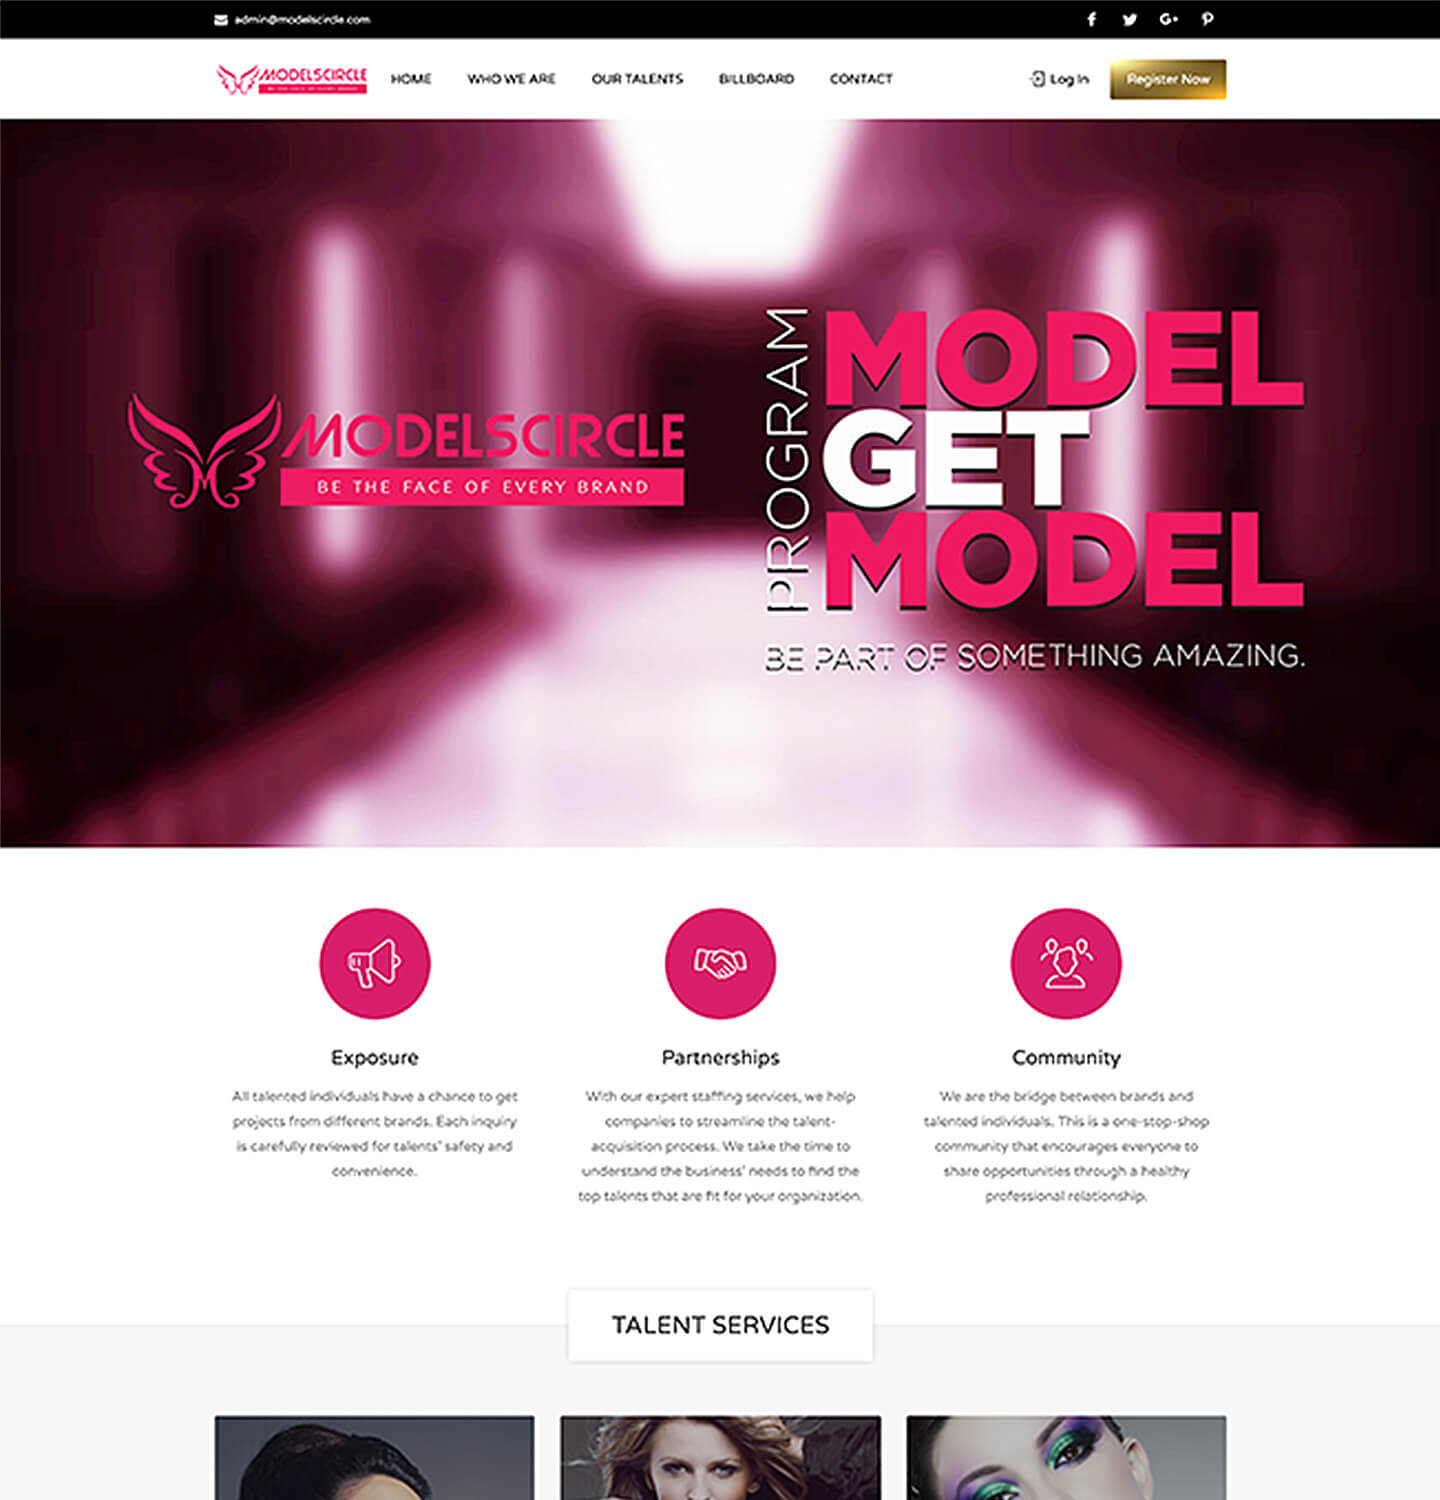 ModelsCircle - Home Page